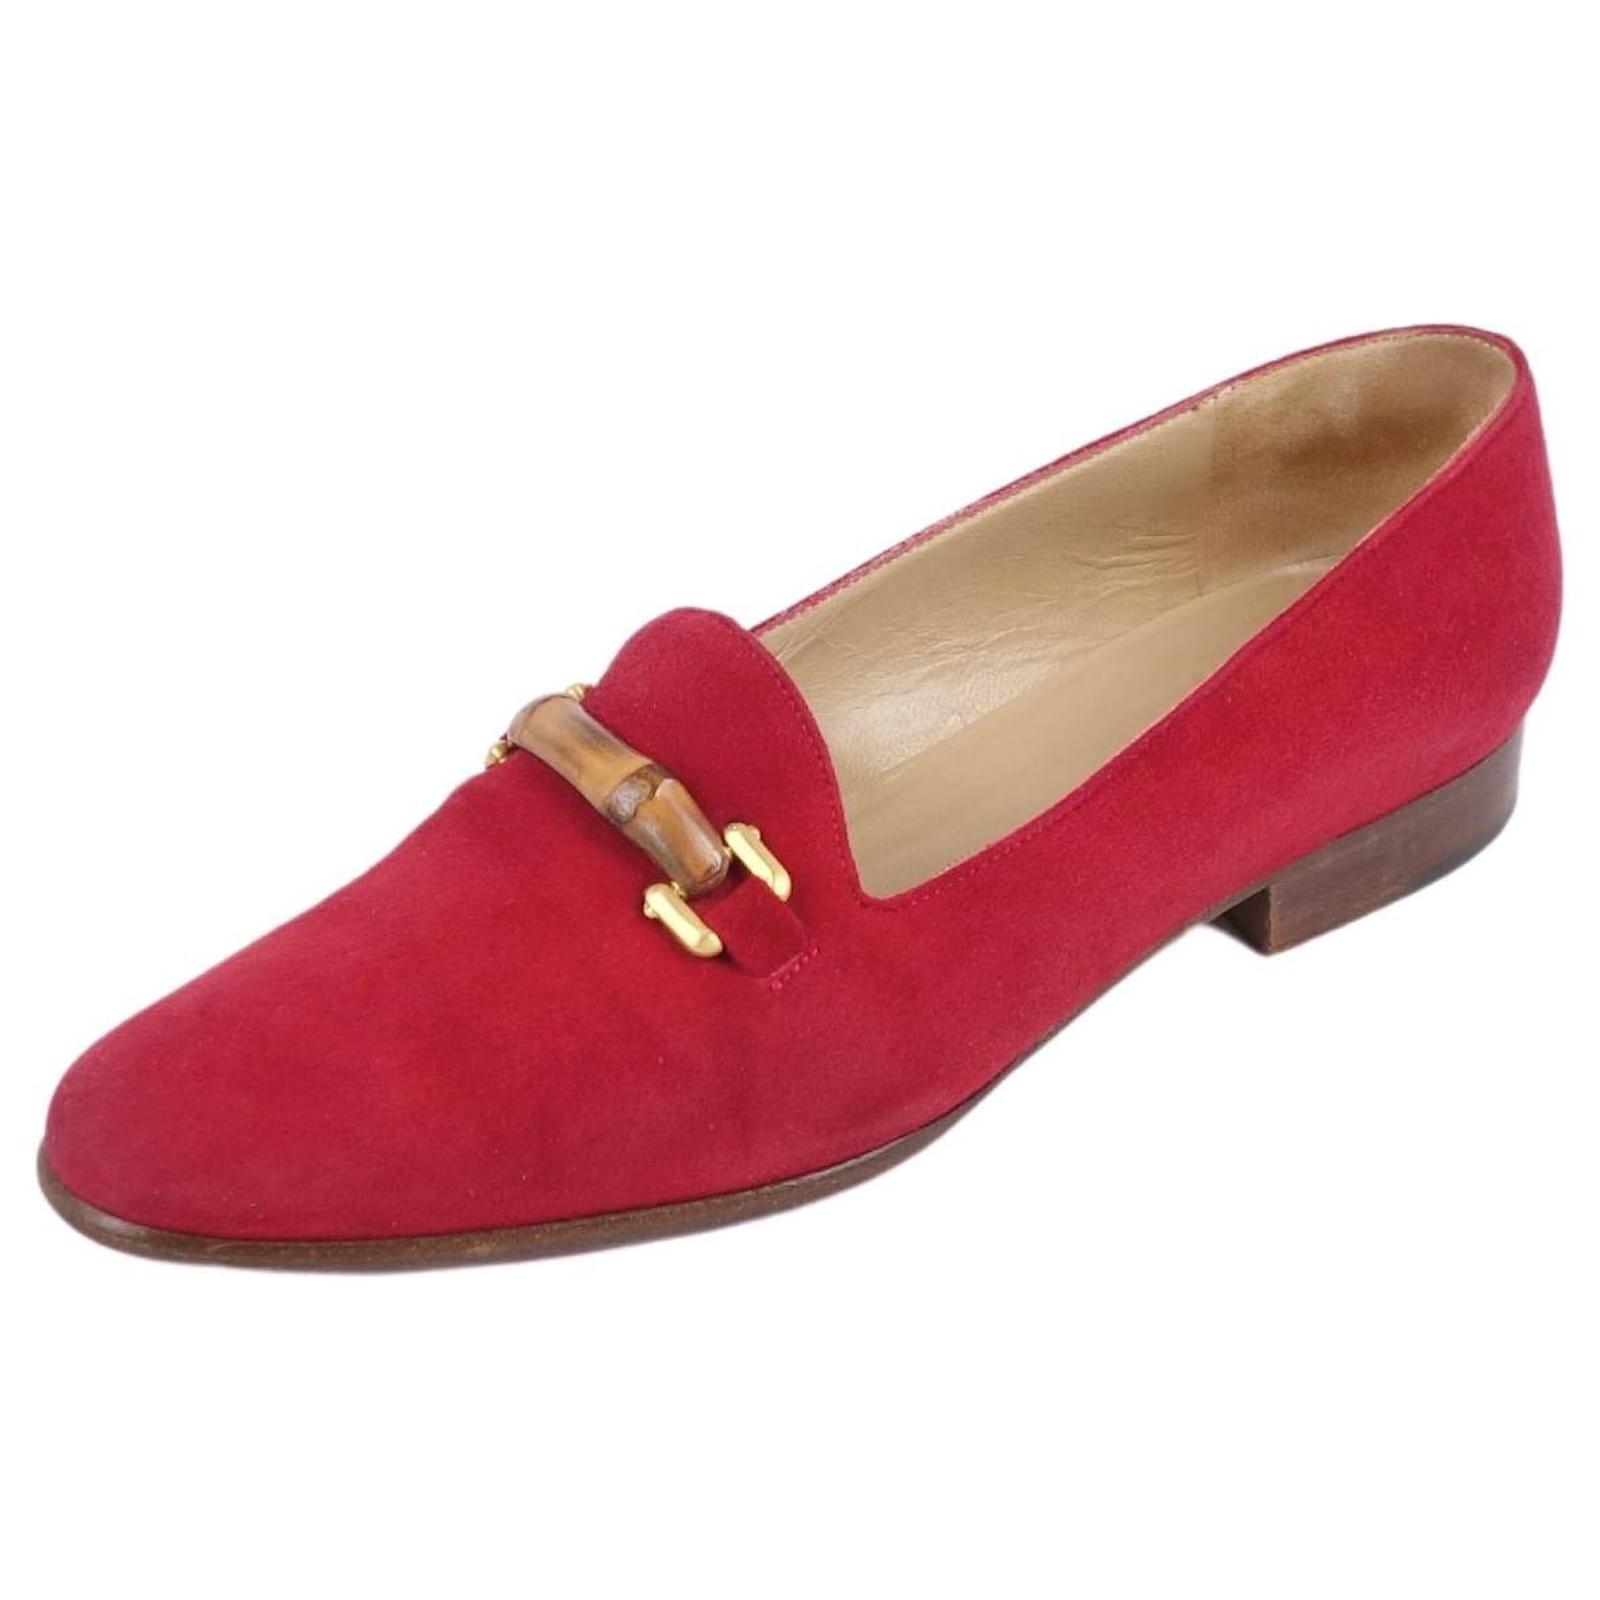 Vintage GUCCI Loafers Pumps Bamboo Shoes Suede Plain 7.5B Red Red Size (equivalent to 24.5cm) - Closet